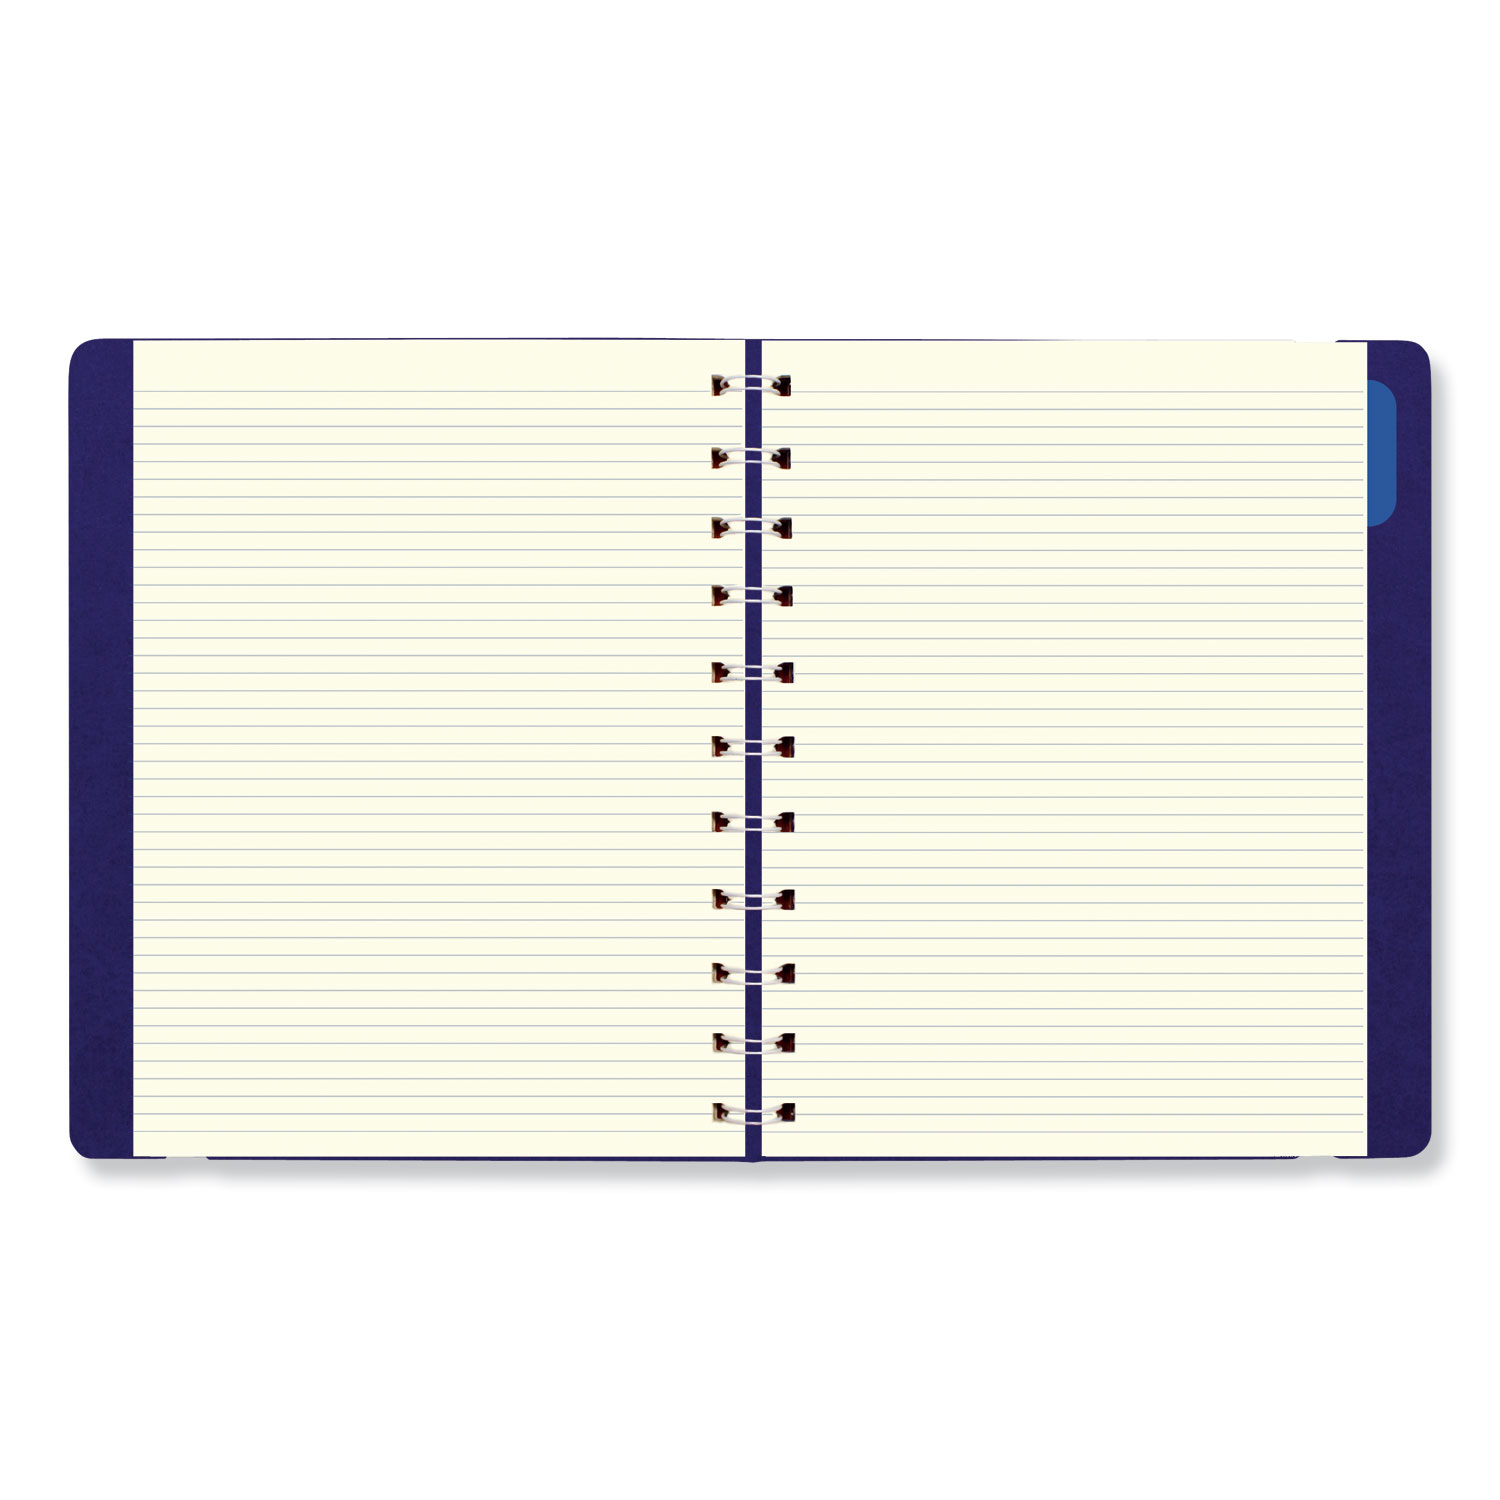 Monthly Planner, 10 3/4 x 8 1/2, Blue, 2019-2020